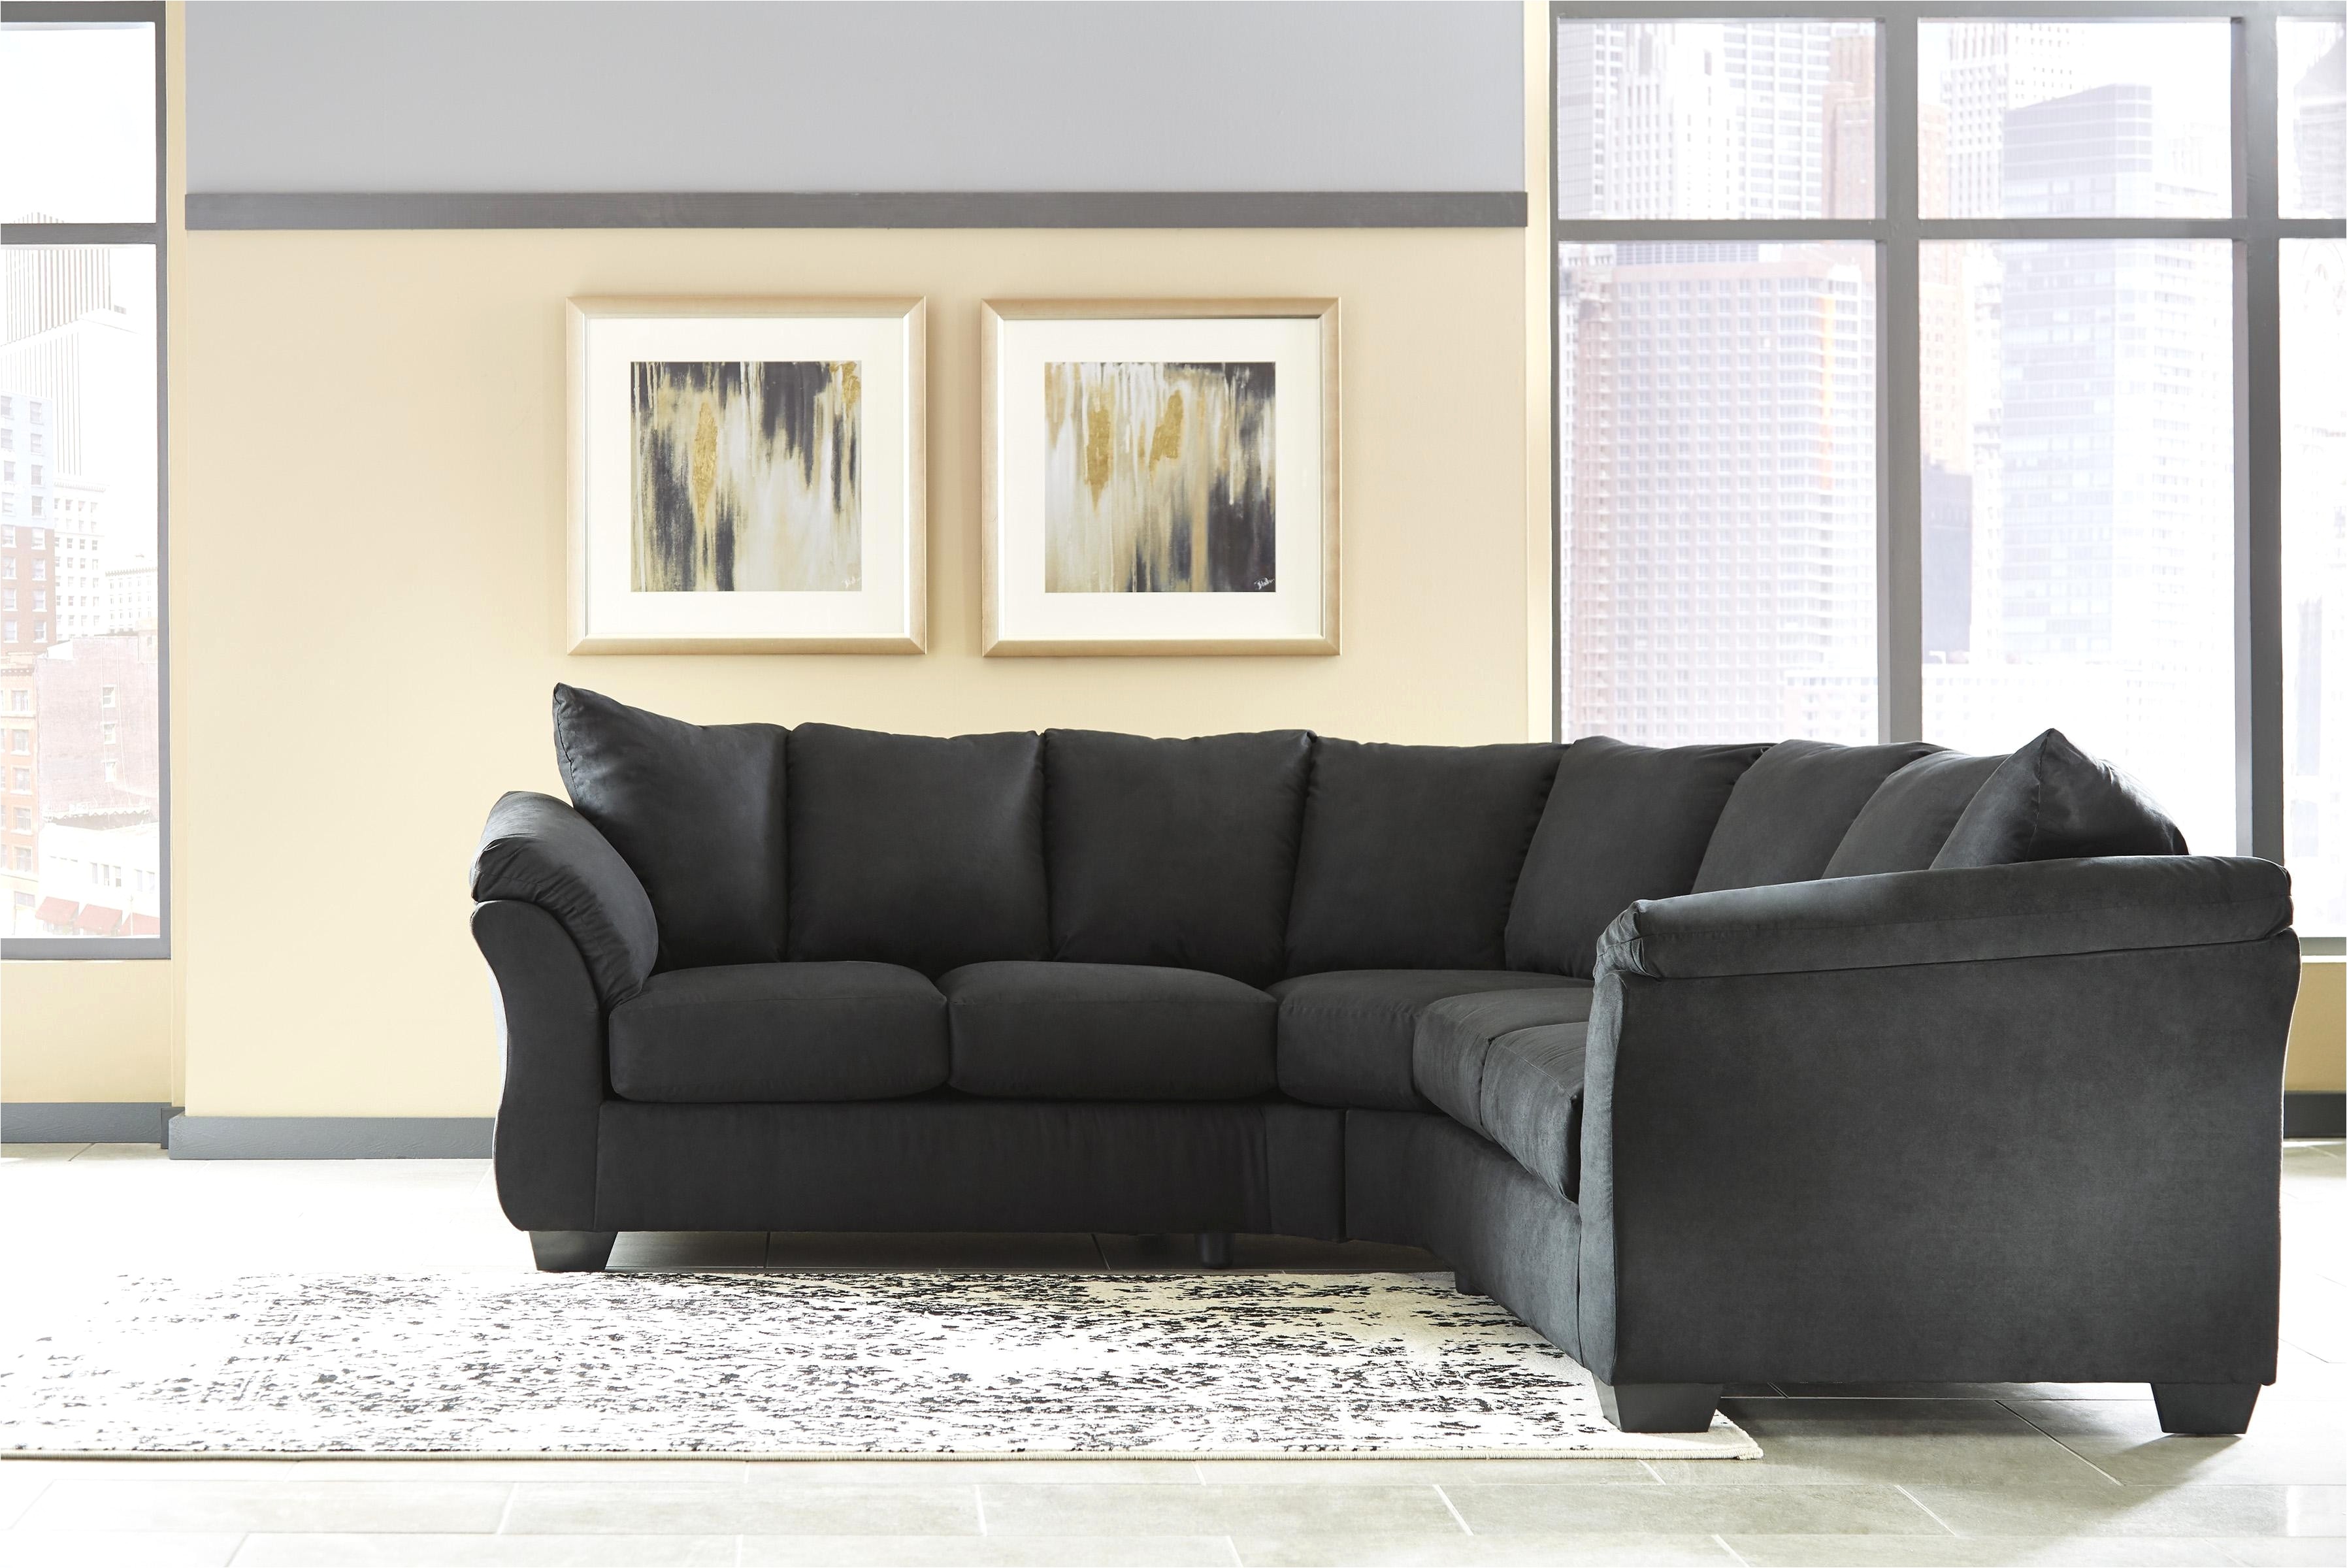 ergonomic living room chairs beautiful sectional couch 0d tags fabulous new sectional couch magnificent full size of sofas big lots sofa sleeper queen